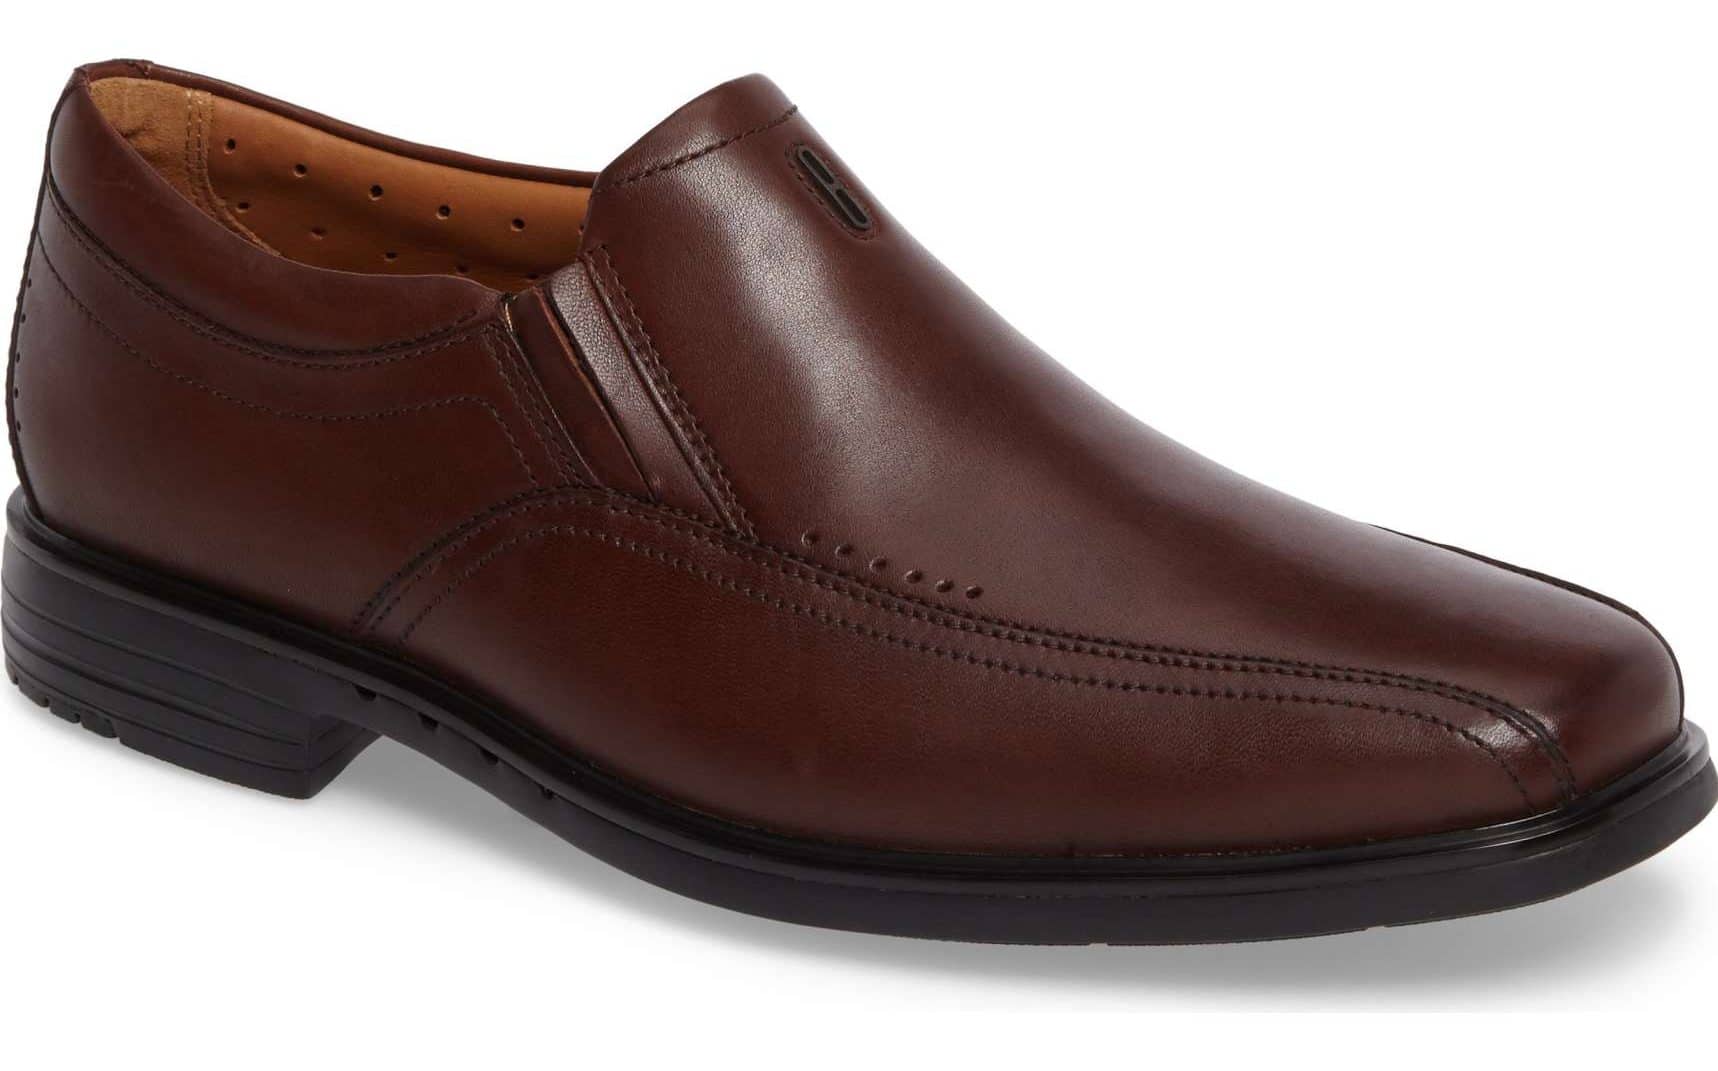 Best Loafers For Men 2017: Clarks Cheap Loafer in Brown Leather 2018